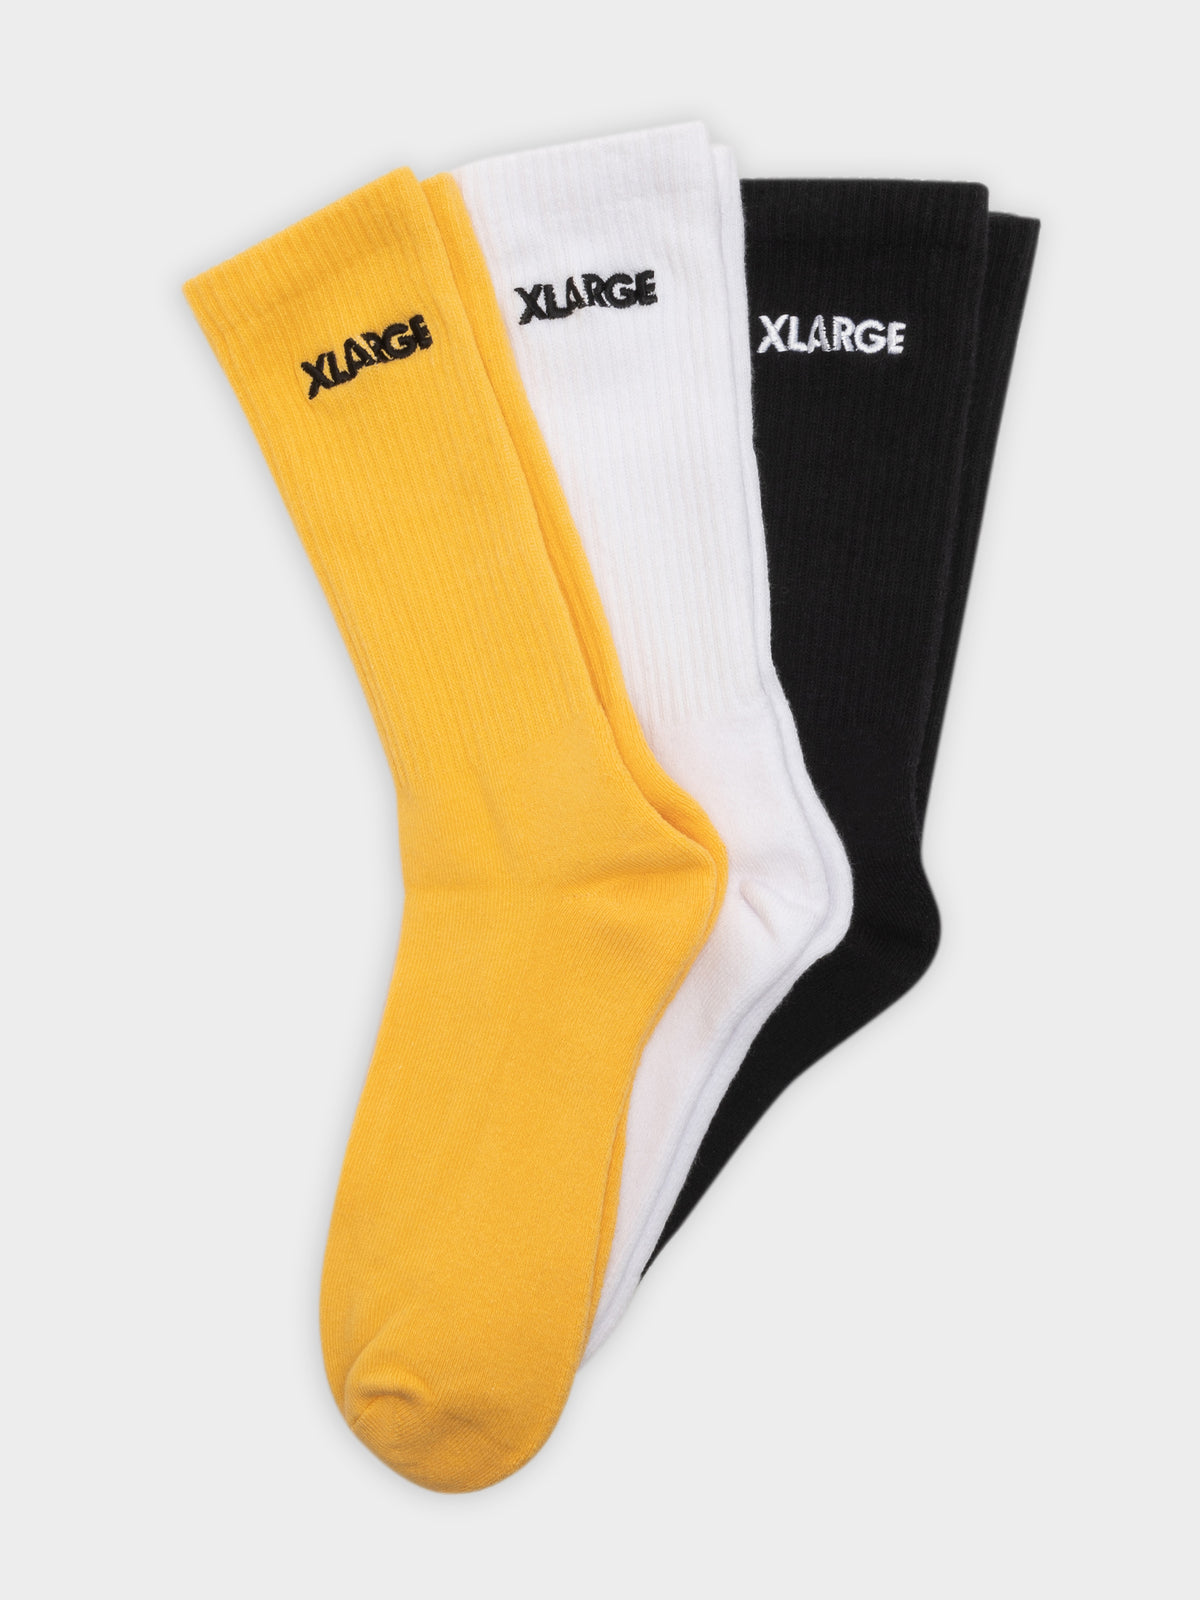 3 Pairs of 91 Text Socks in White, Black &amp; Yellow